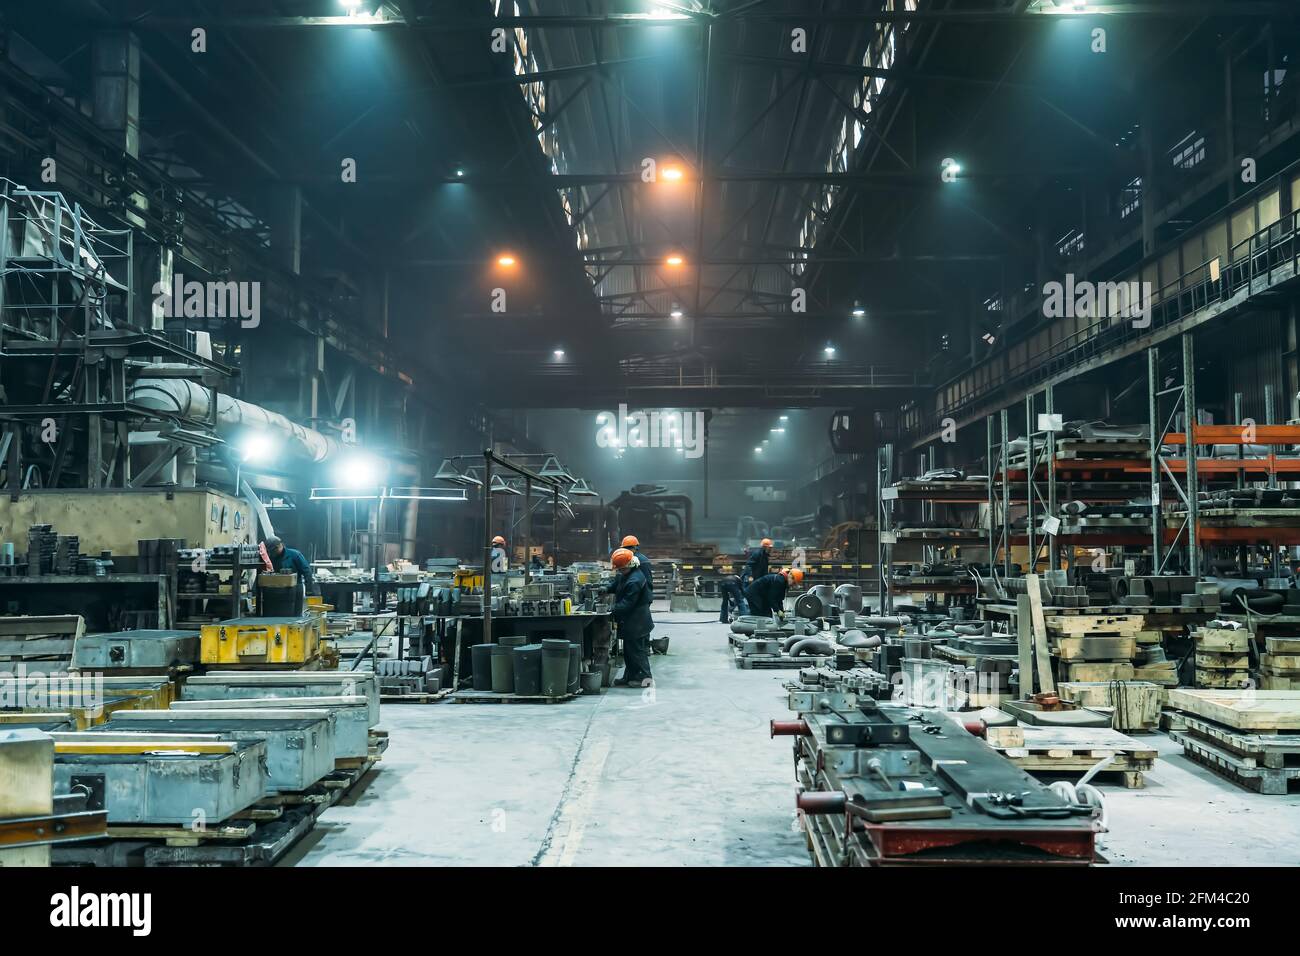 Steel Factory with workers in process of work, industrial interior, large hangar with iron production. Stock Photo